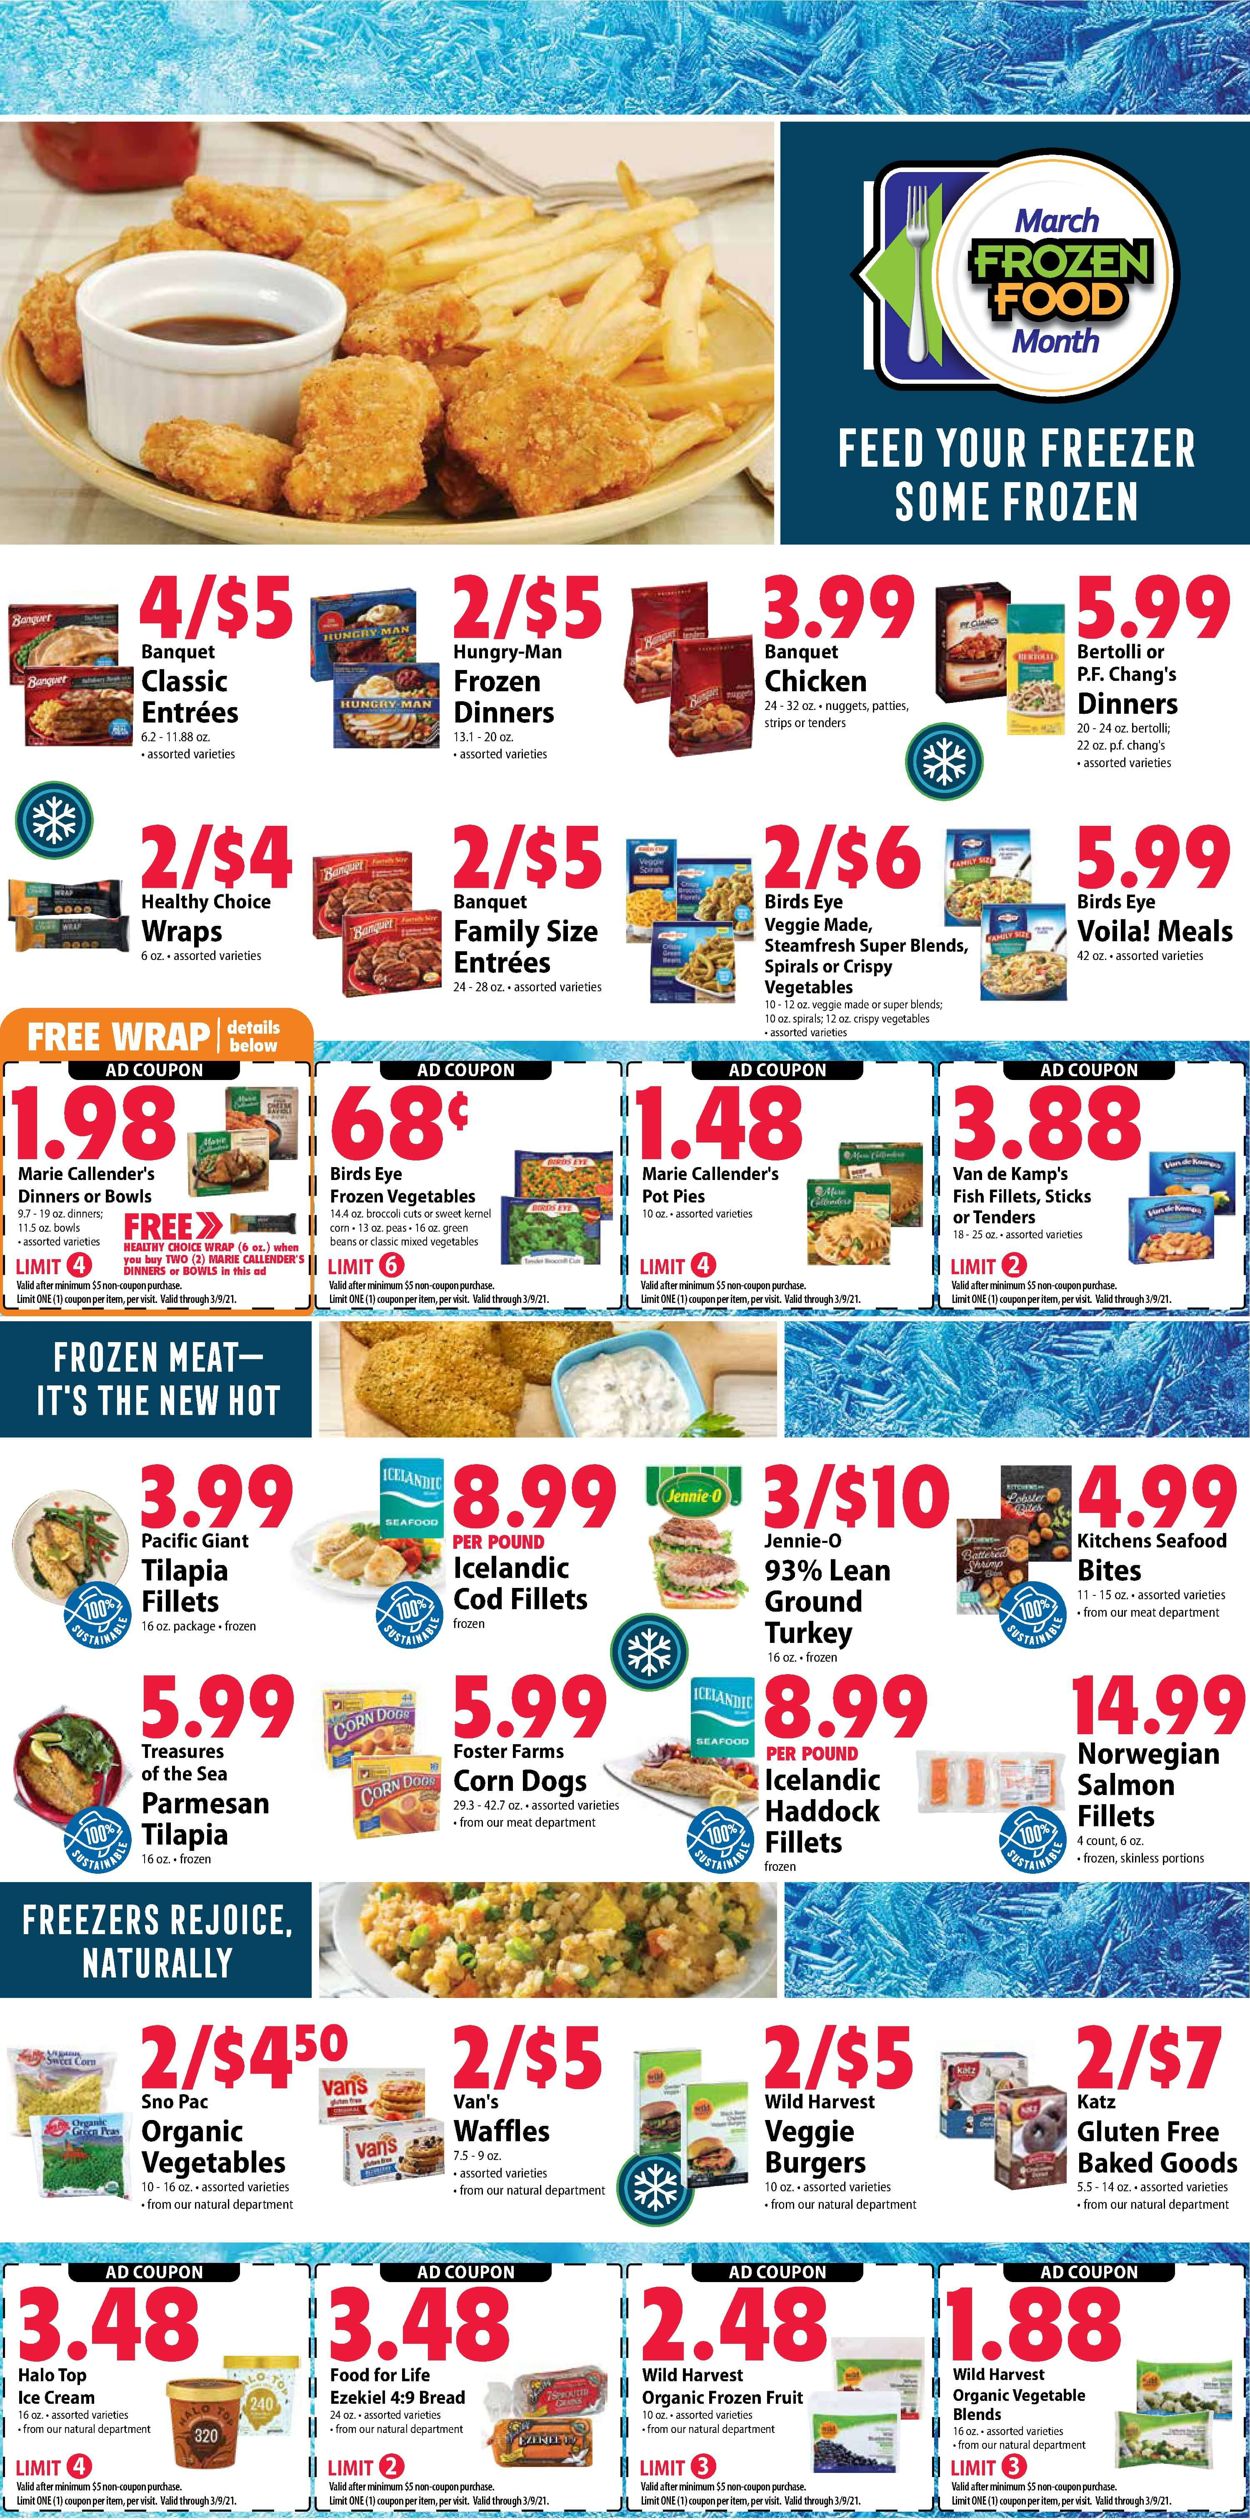 Festival Foods Current weekly ad 03/03 03/09/2021 [5]